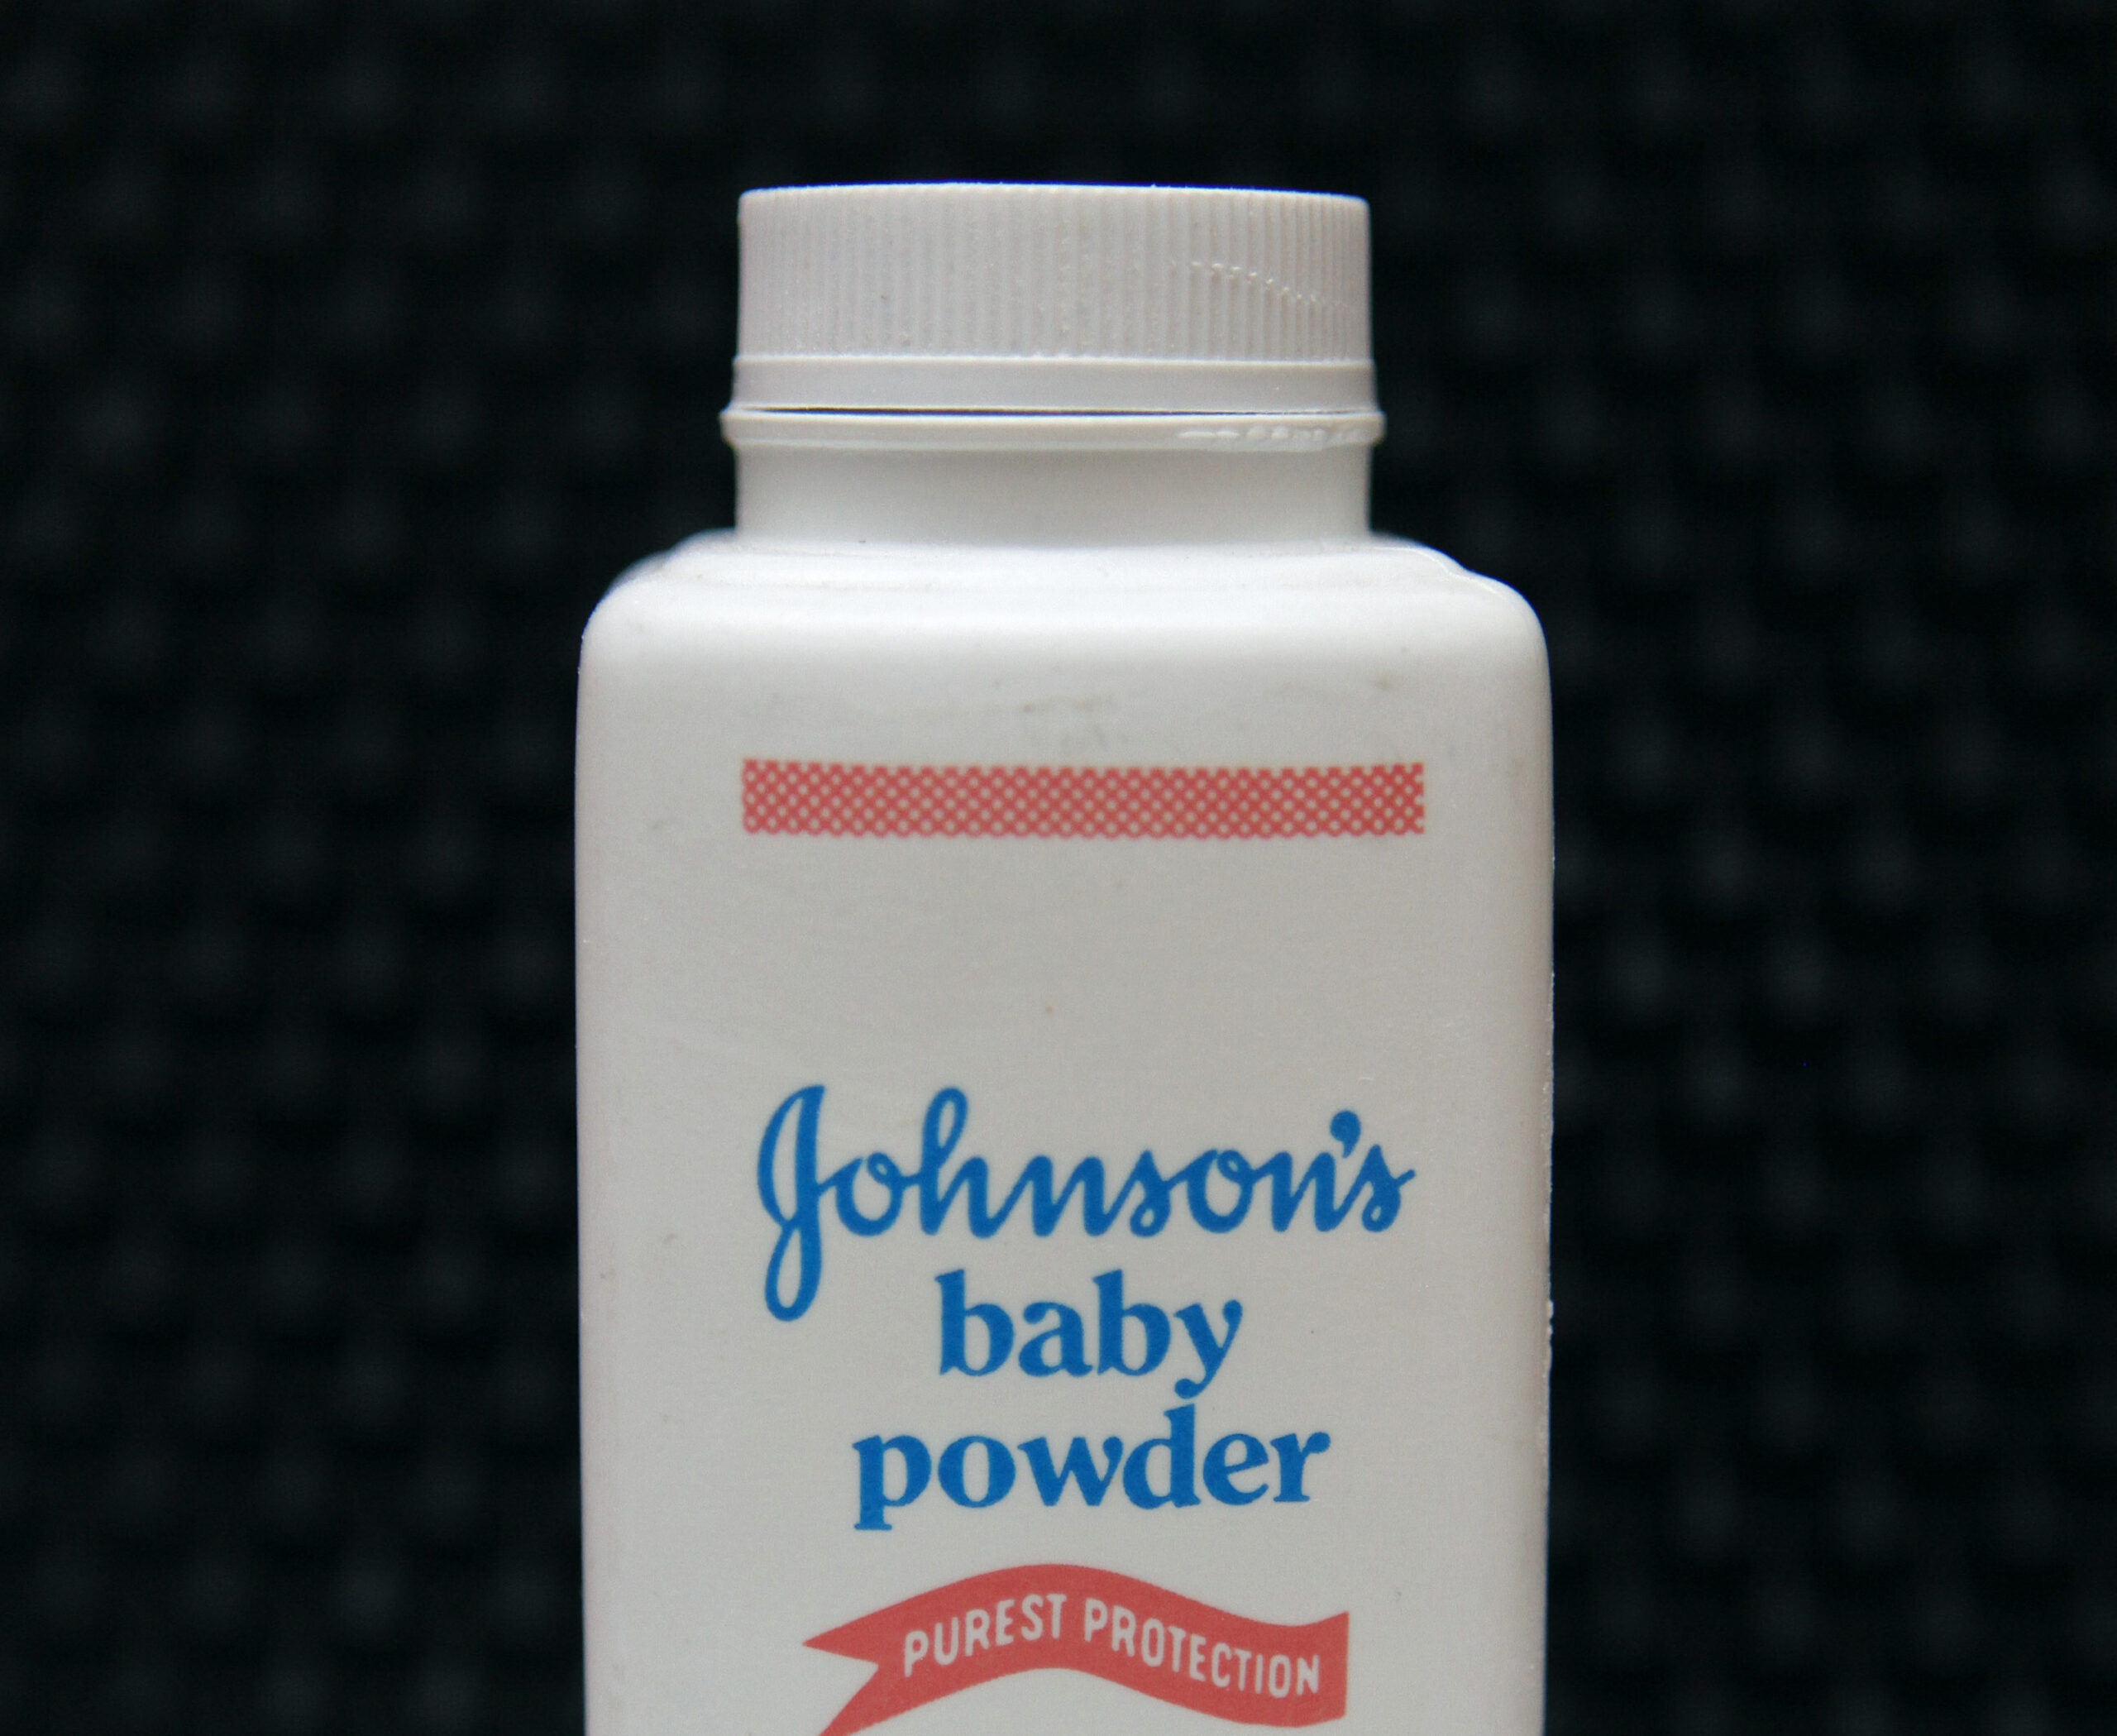 FILE - In this April 15, 2011 file photo, a bottle of Johnson's baby powder is displayed in San Francisco. Johnson & Johnson is pulling its iconic, talc-based Johnson’s Baby Powder from shelves worldwide next year in favor of a product based on cornstarch. The health care giant’s announcement Friday, Aug. 12, 2022, comes two years after it ended talc-based powder sales in the U.S. and Canada, where demand has dwindled amid thousands of lawsuits claiming it had caused cancer (AP Photo/Jeff Chiu, File)